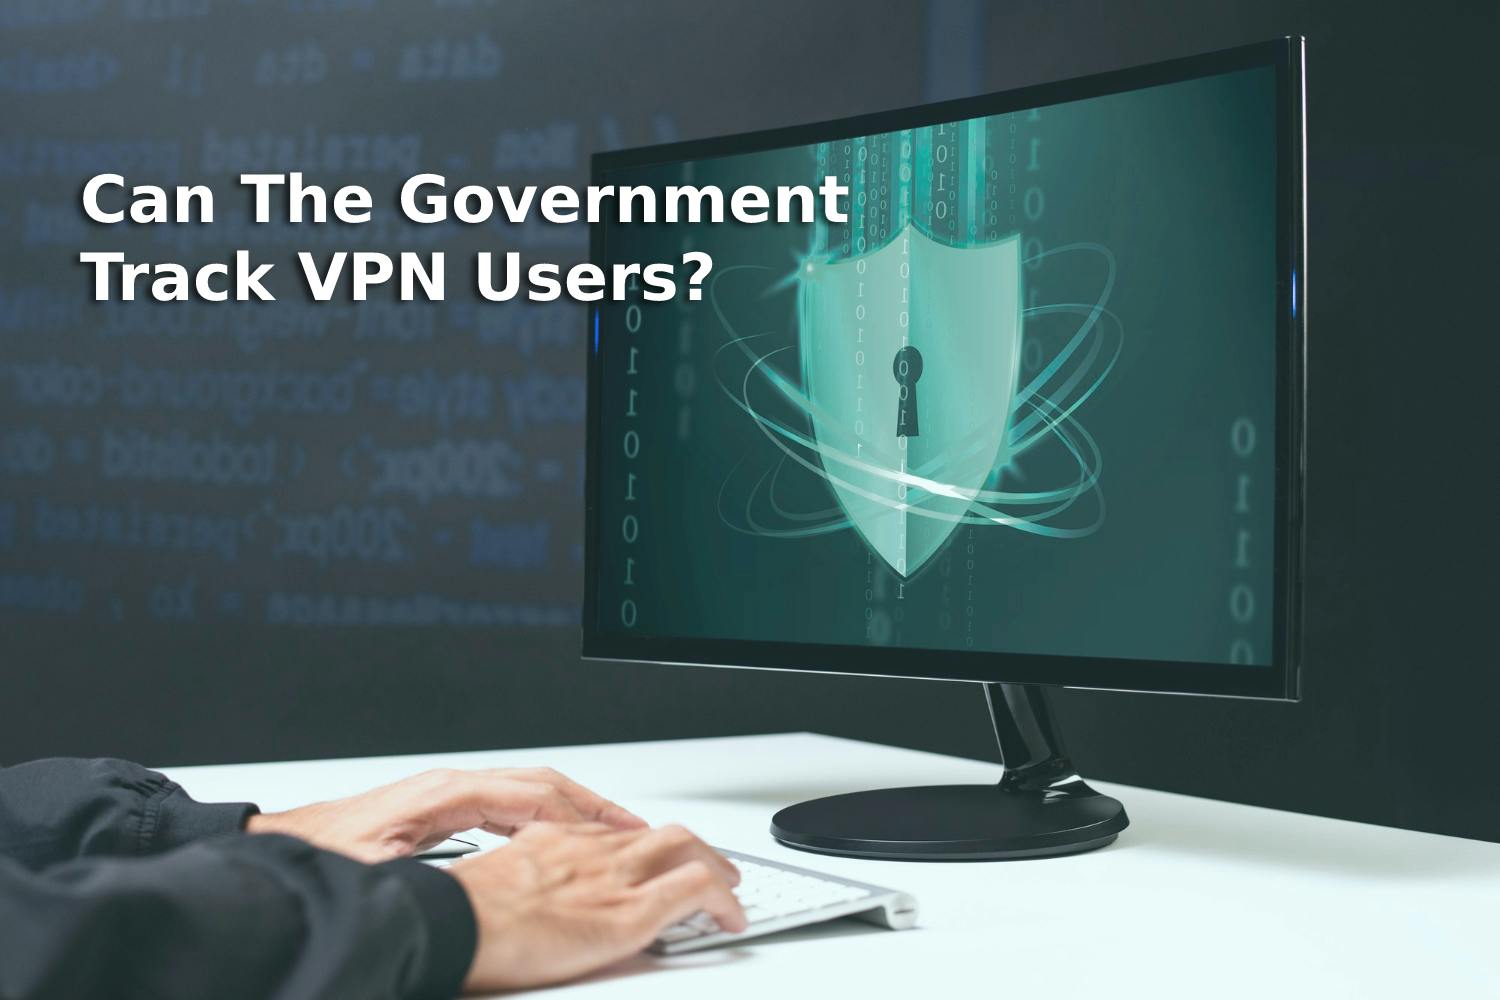 Can The Government Track VPN Users?